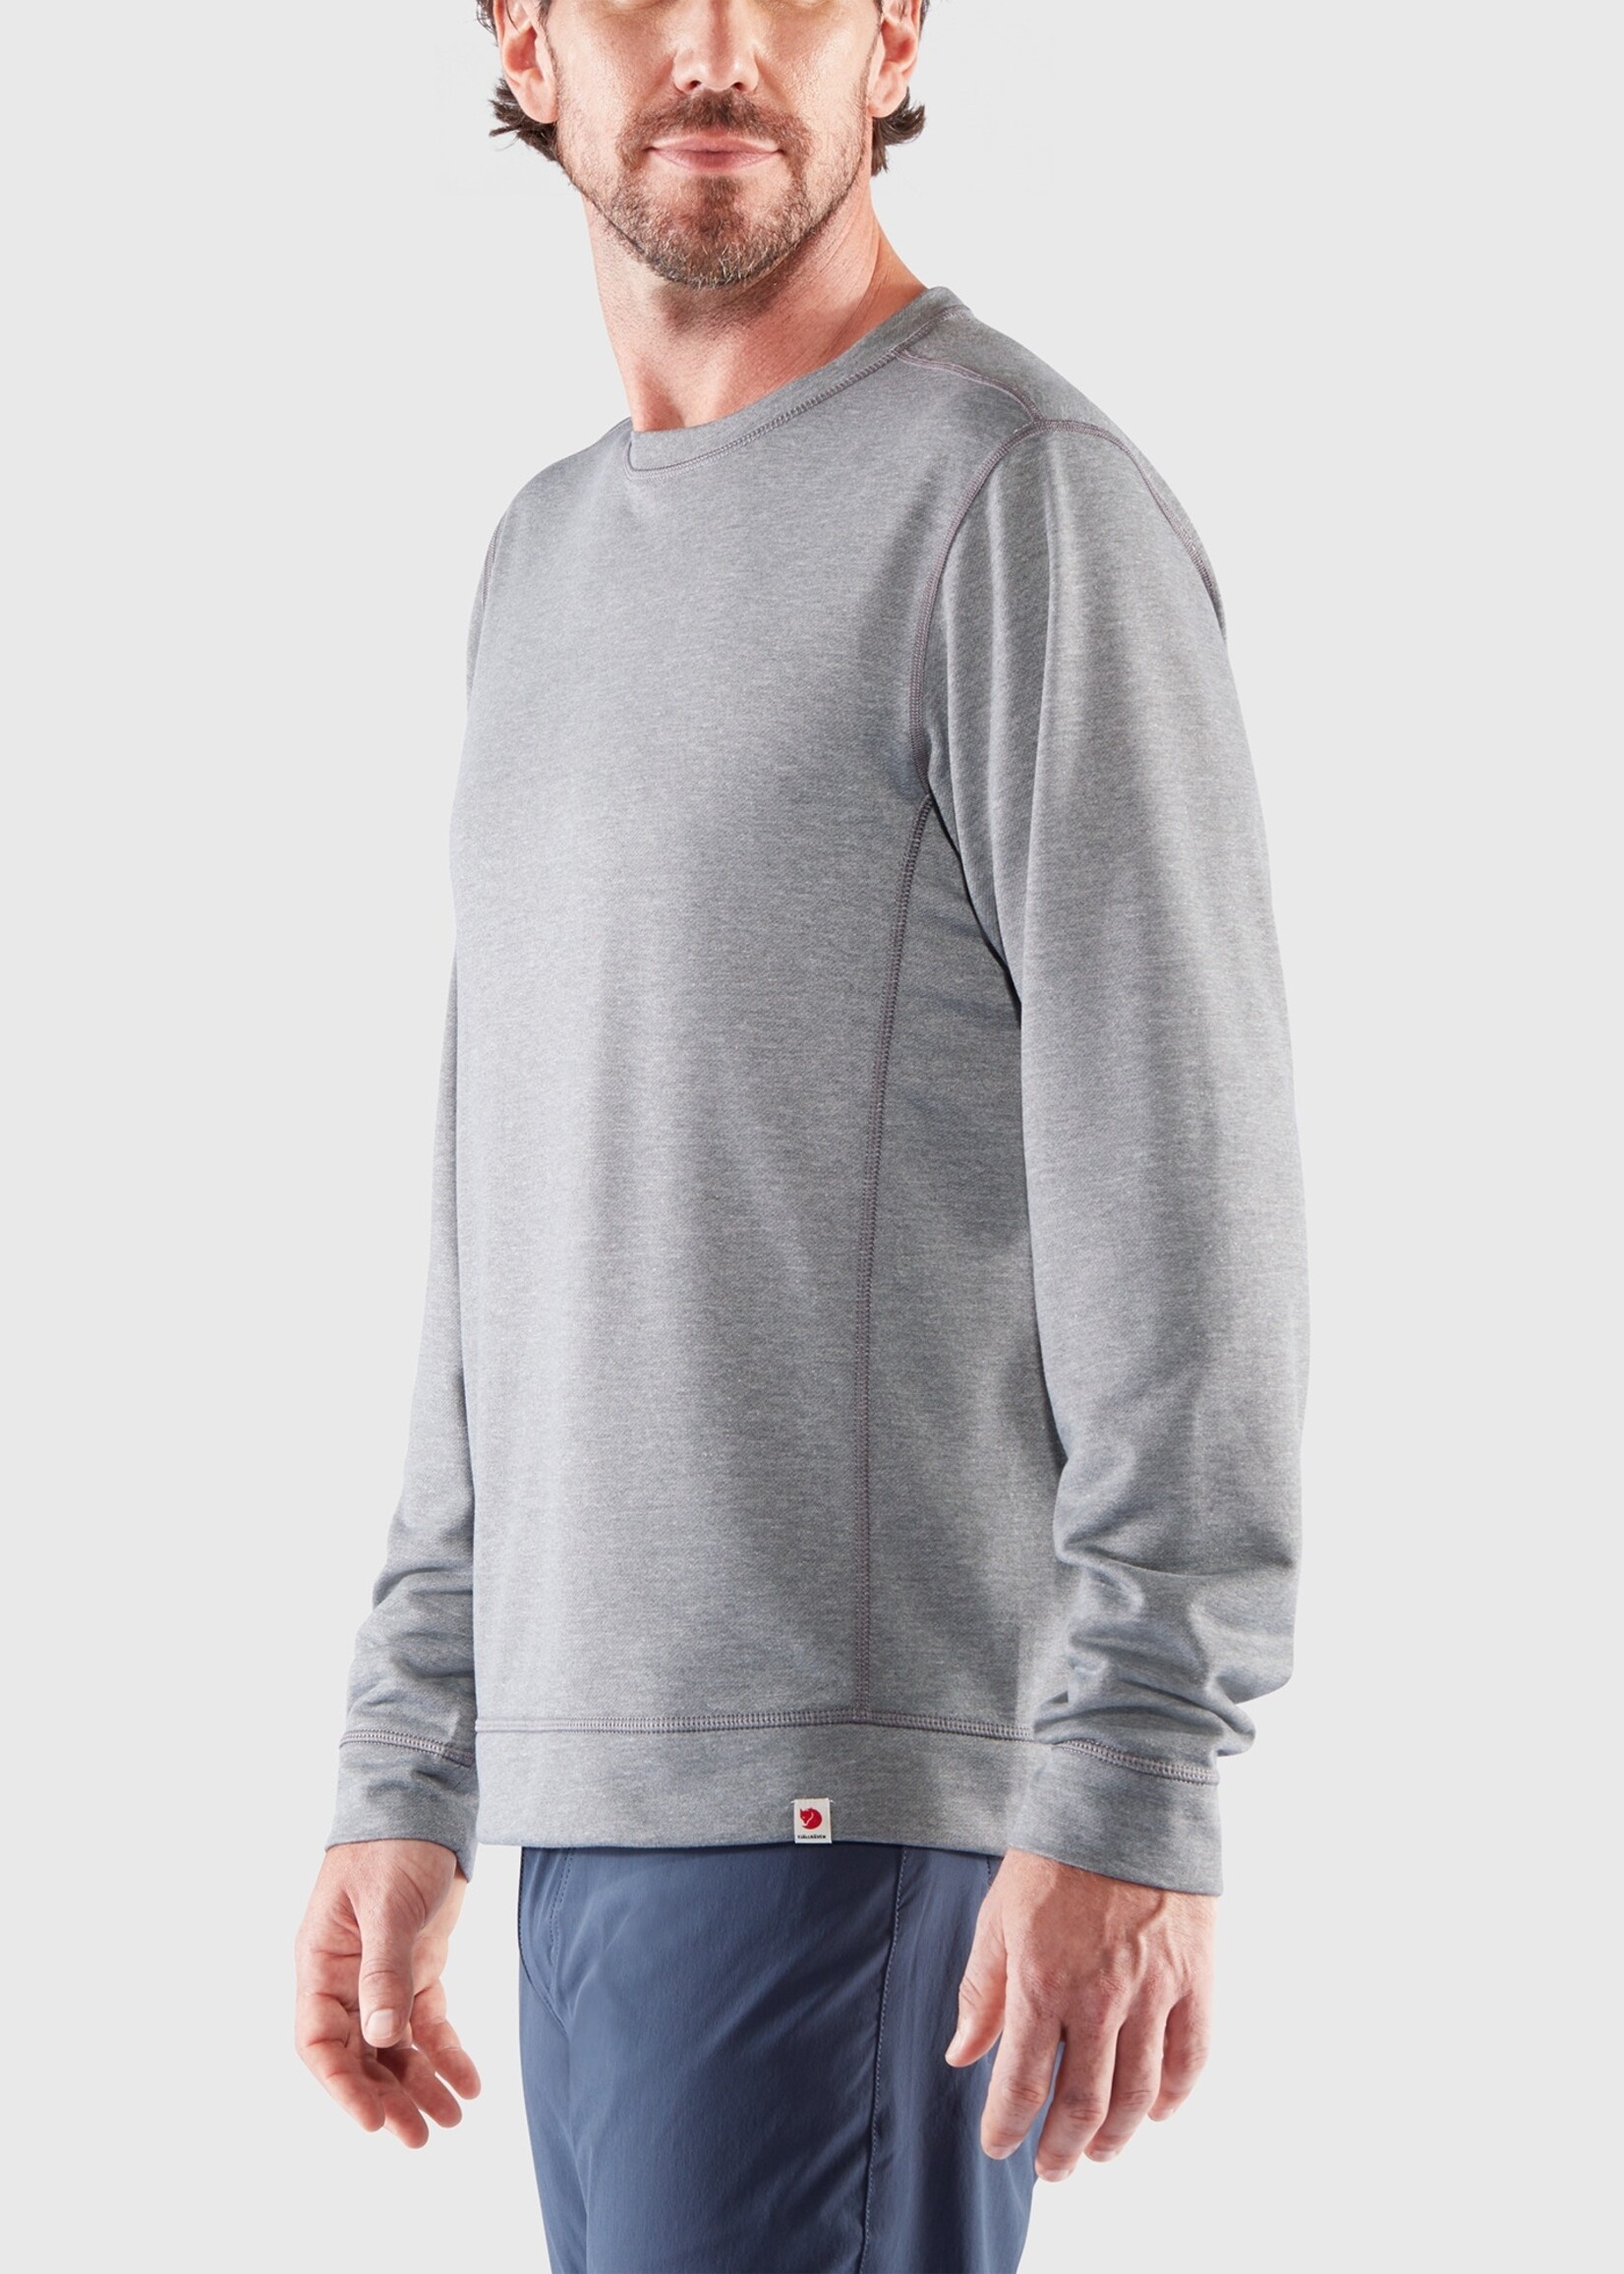 FJALL RAVEN HIGH COAST LITE Sweater, Recycled Fabric